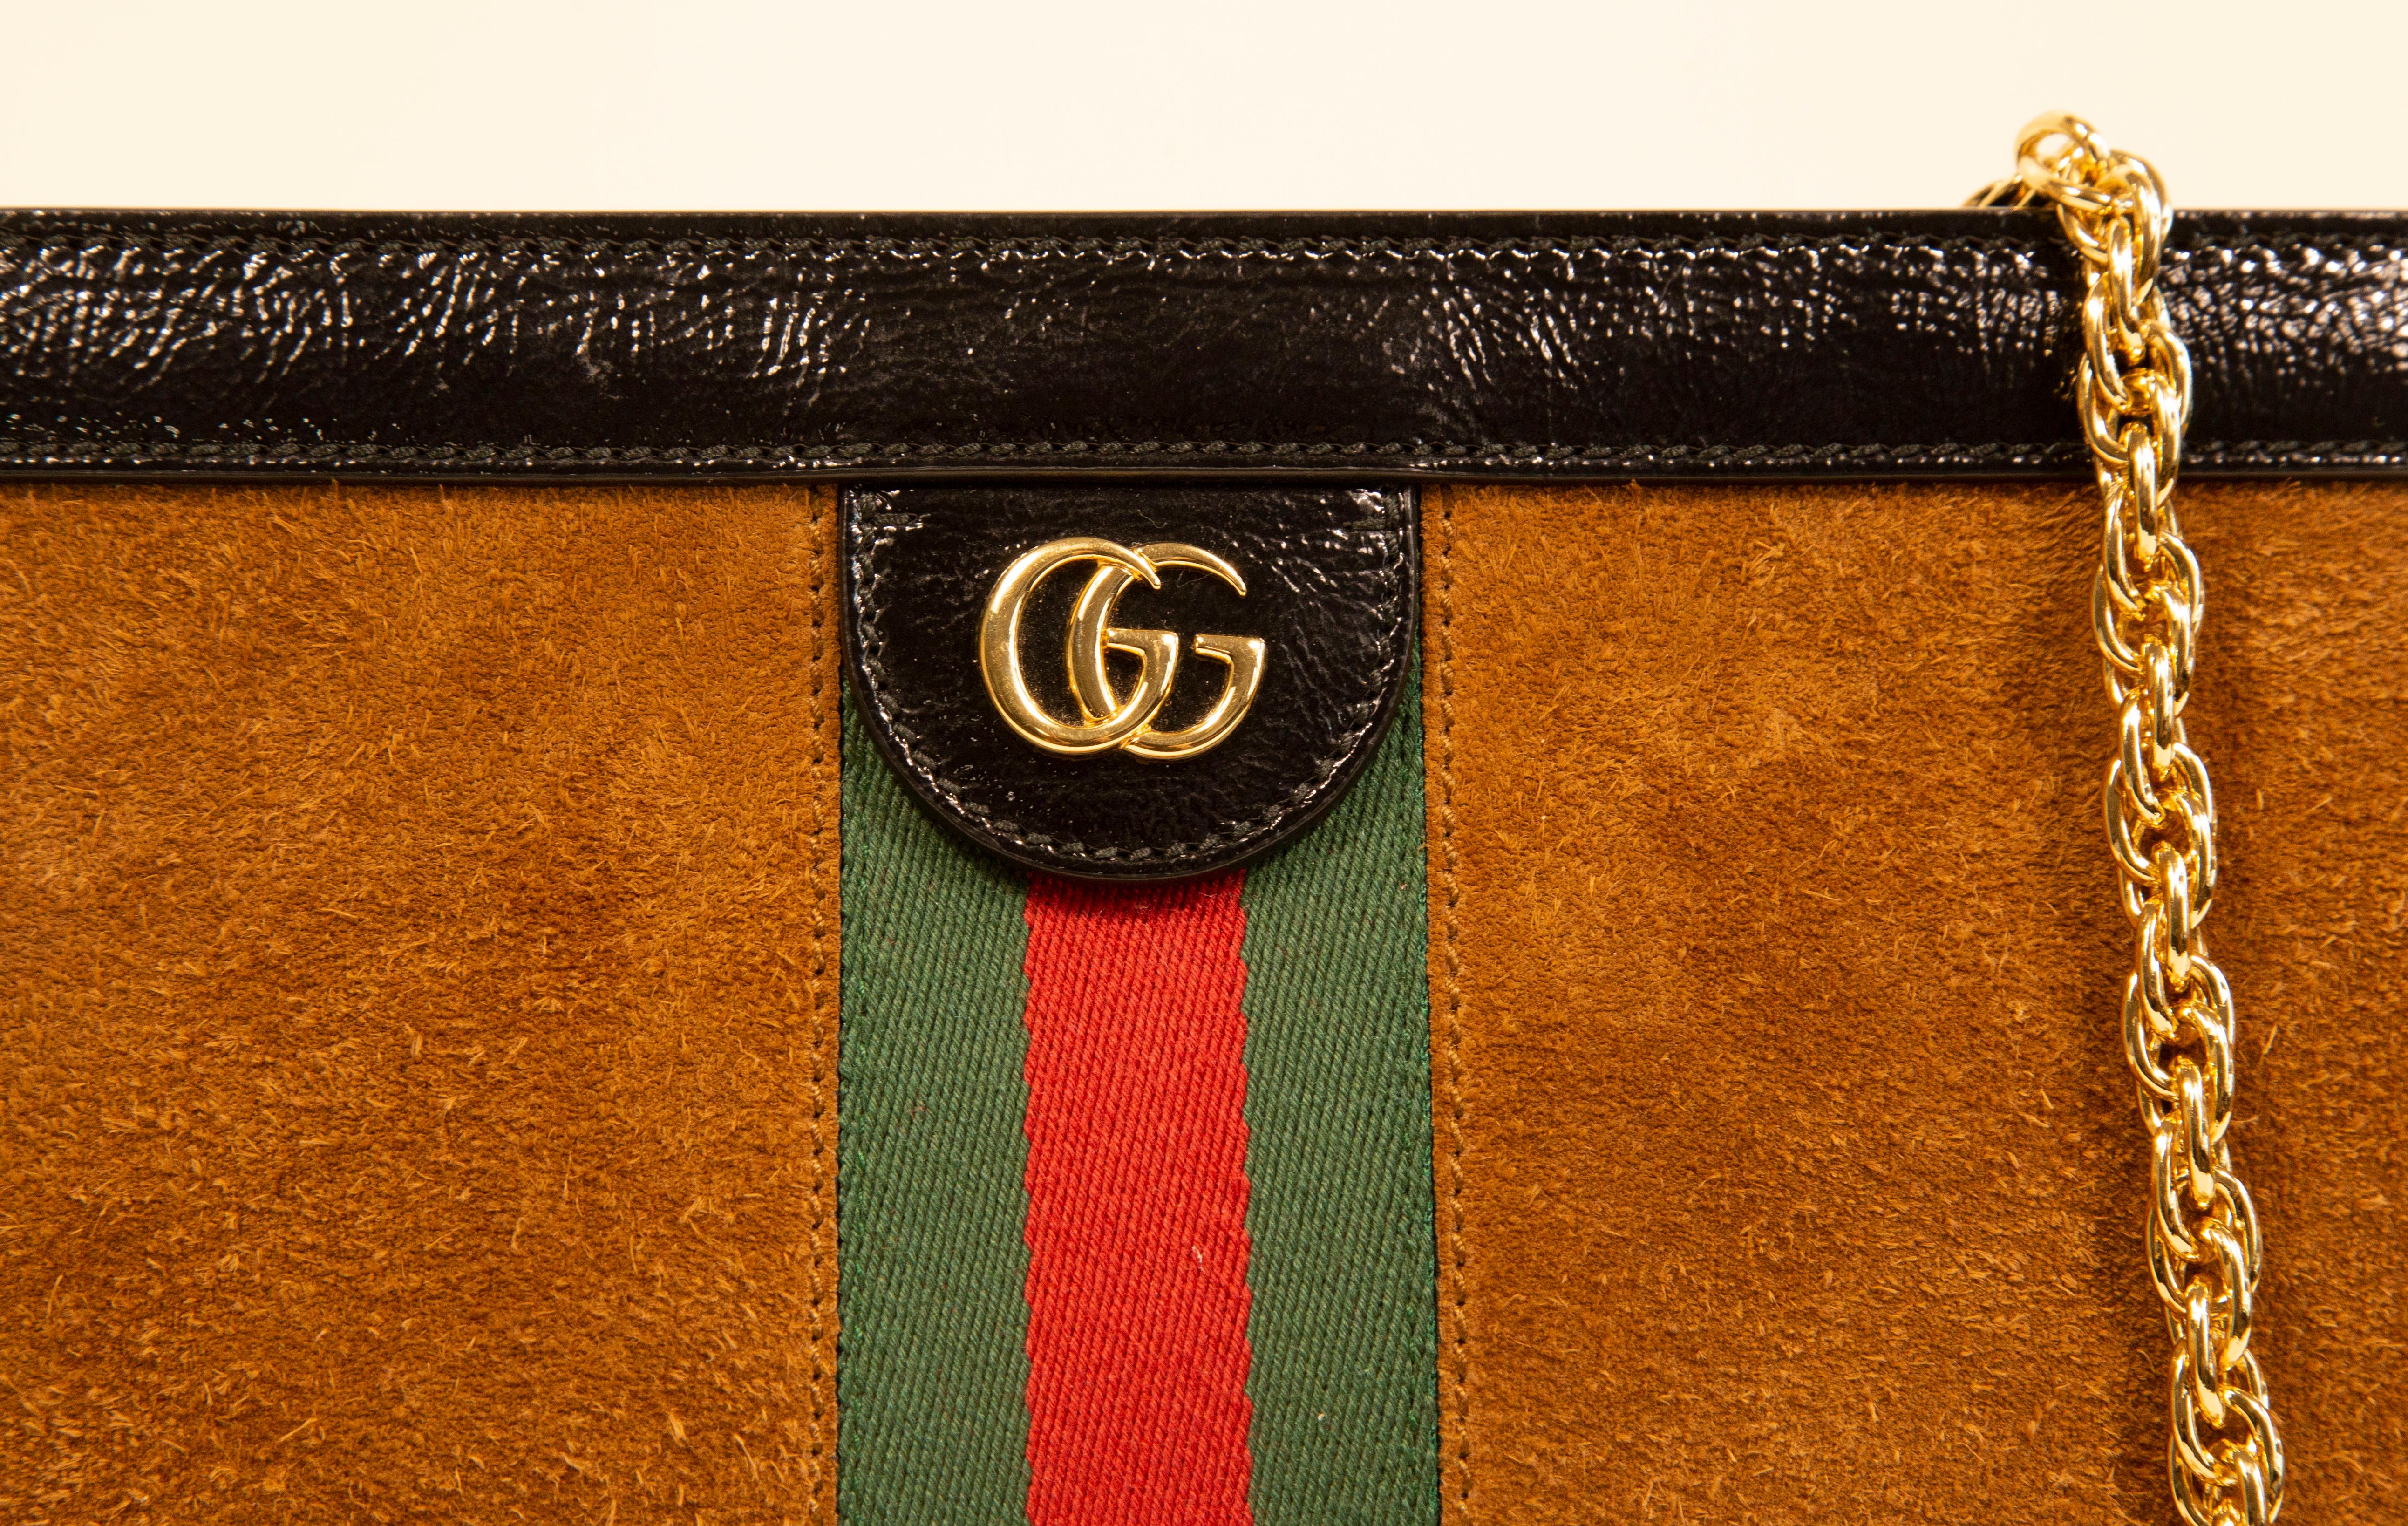 A Gucci Ophidia Chain shoulder bag made of cognac brown suede with black patent leather trim and gold tone hardware. The interior is lined with blue silky fabric. The inner compartment is divided into two compartments of which one features one slide